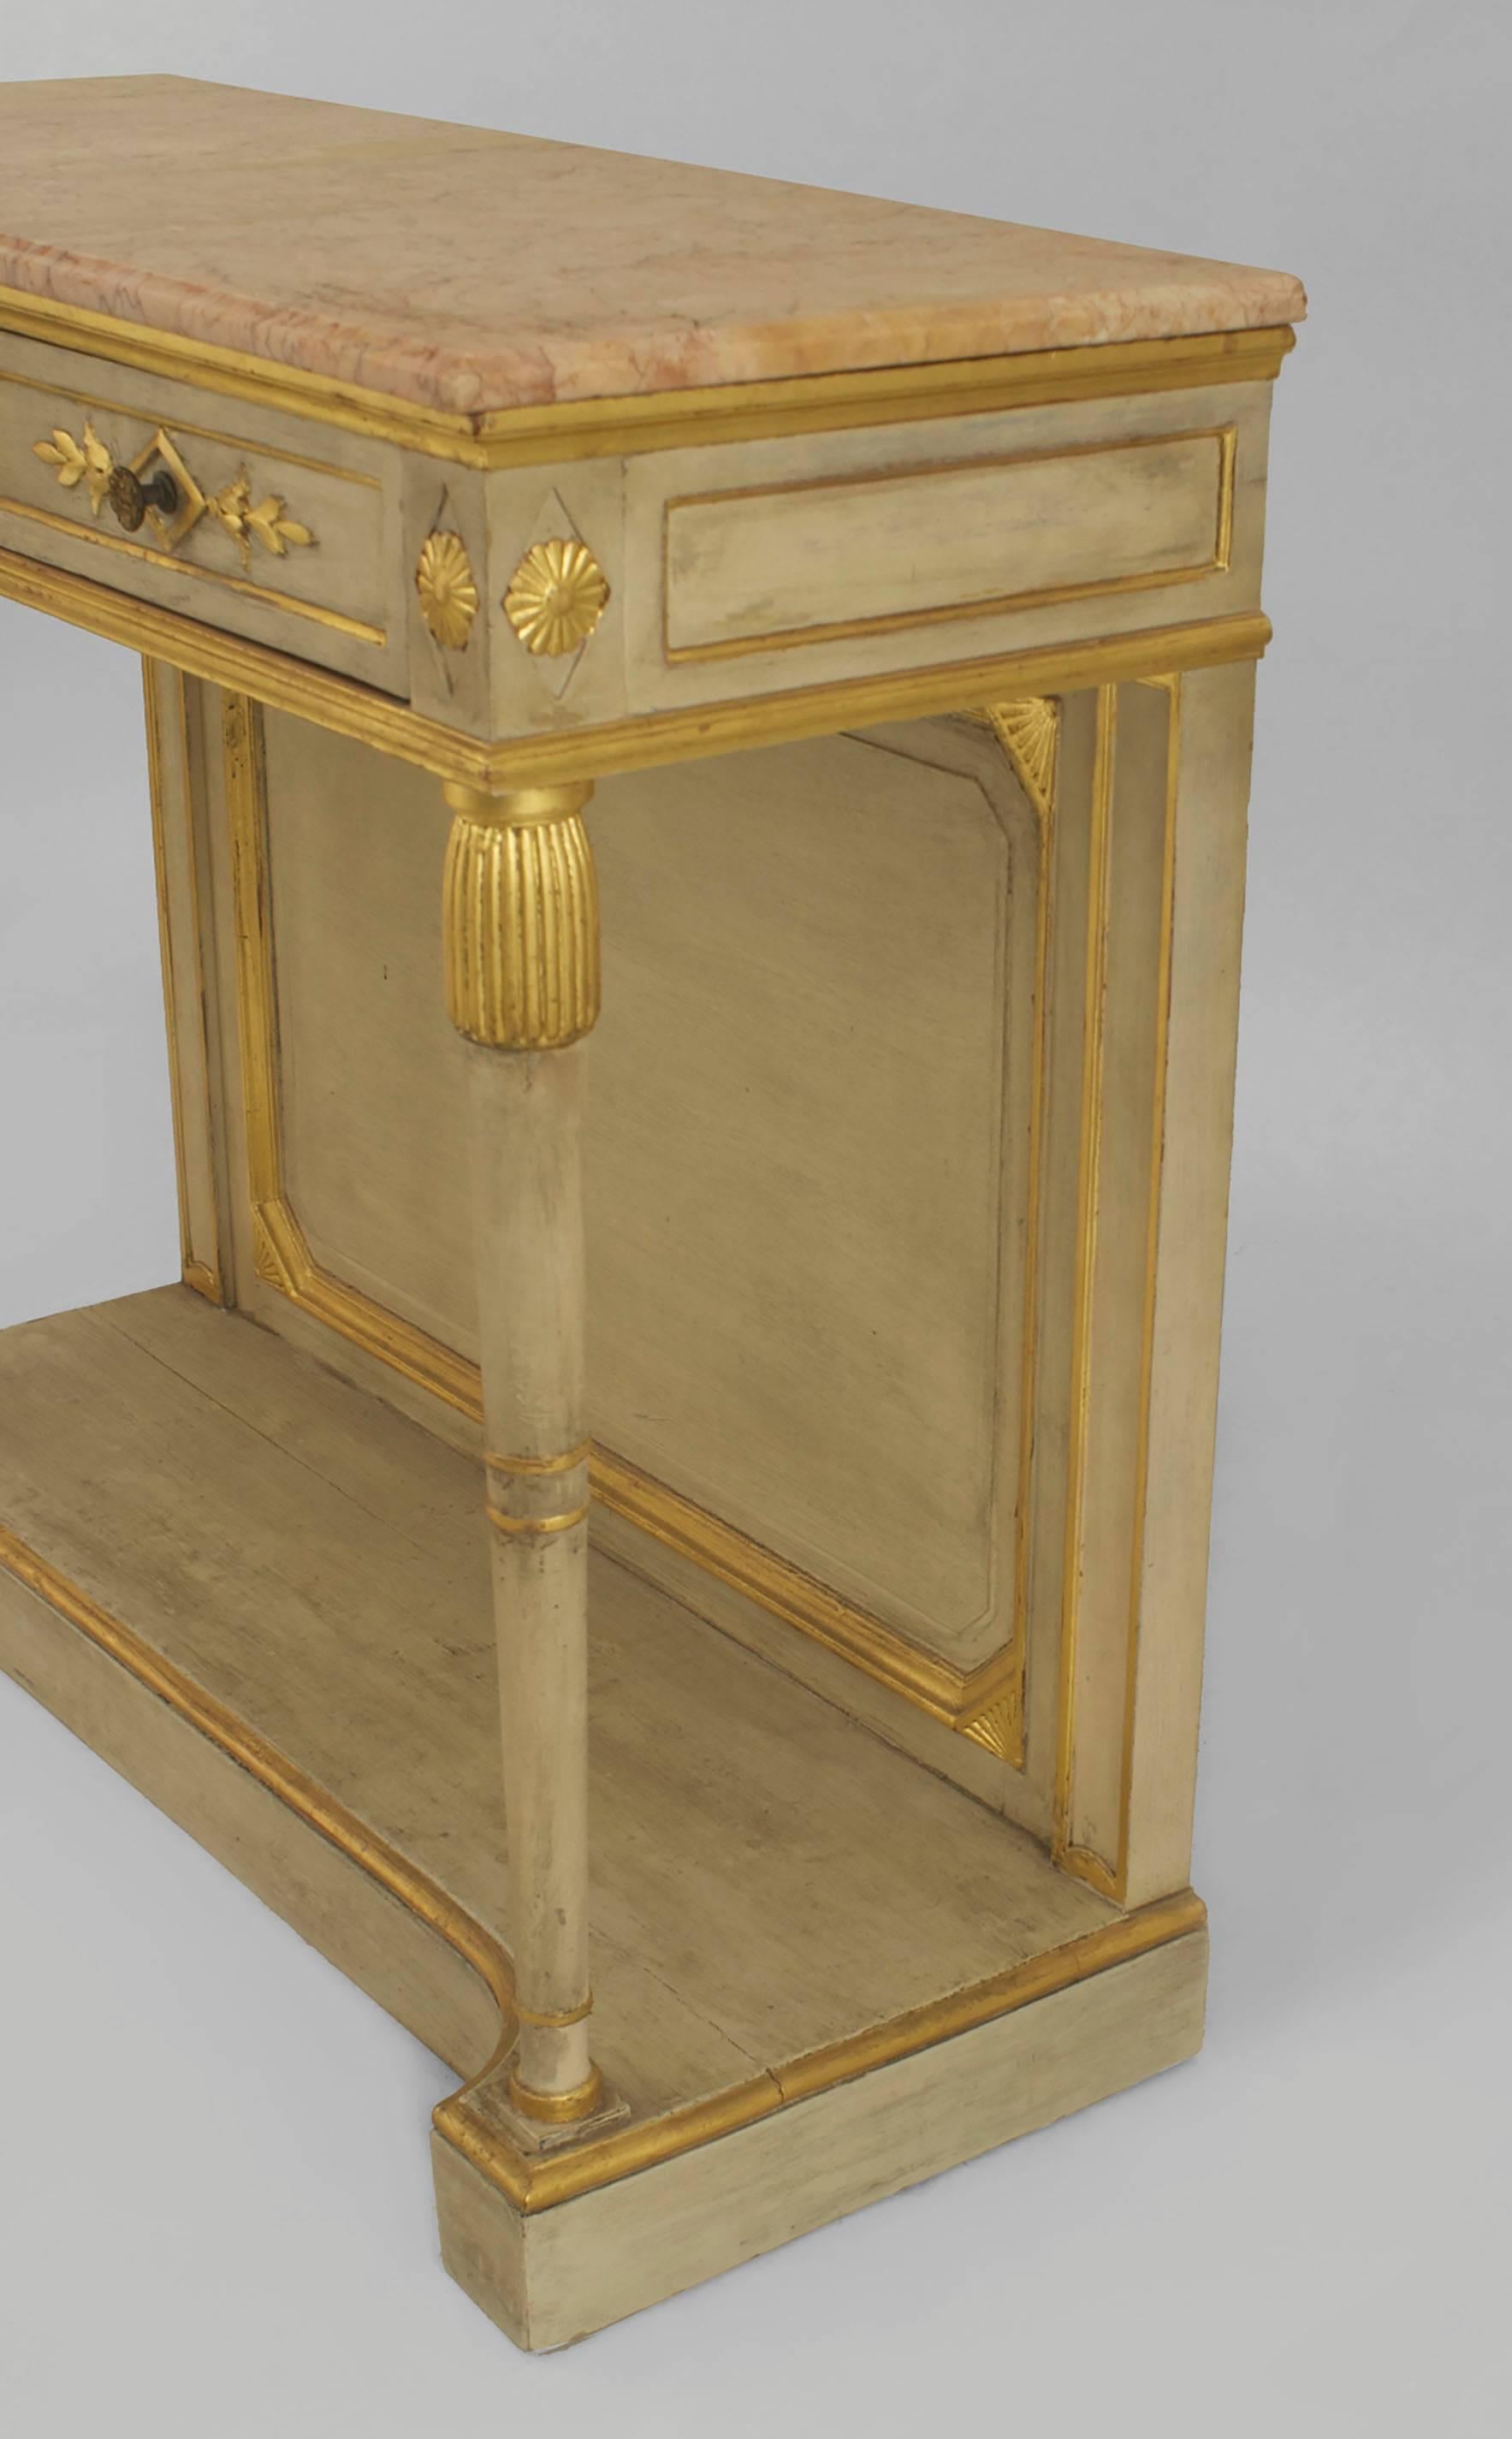 Pair of neoclassic style (1940s) off-white painted and gilt carved
trimmed console tables with a platform base and two drawers under a marble top (stamped: JANSEN).